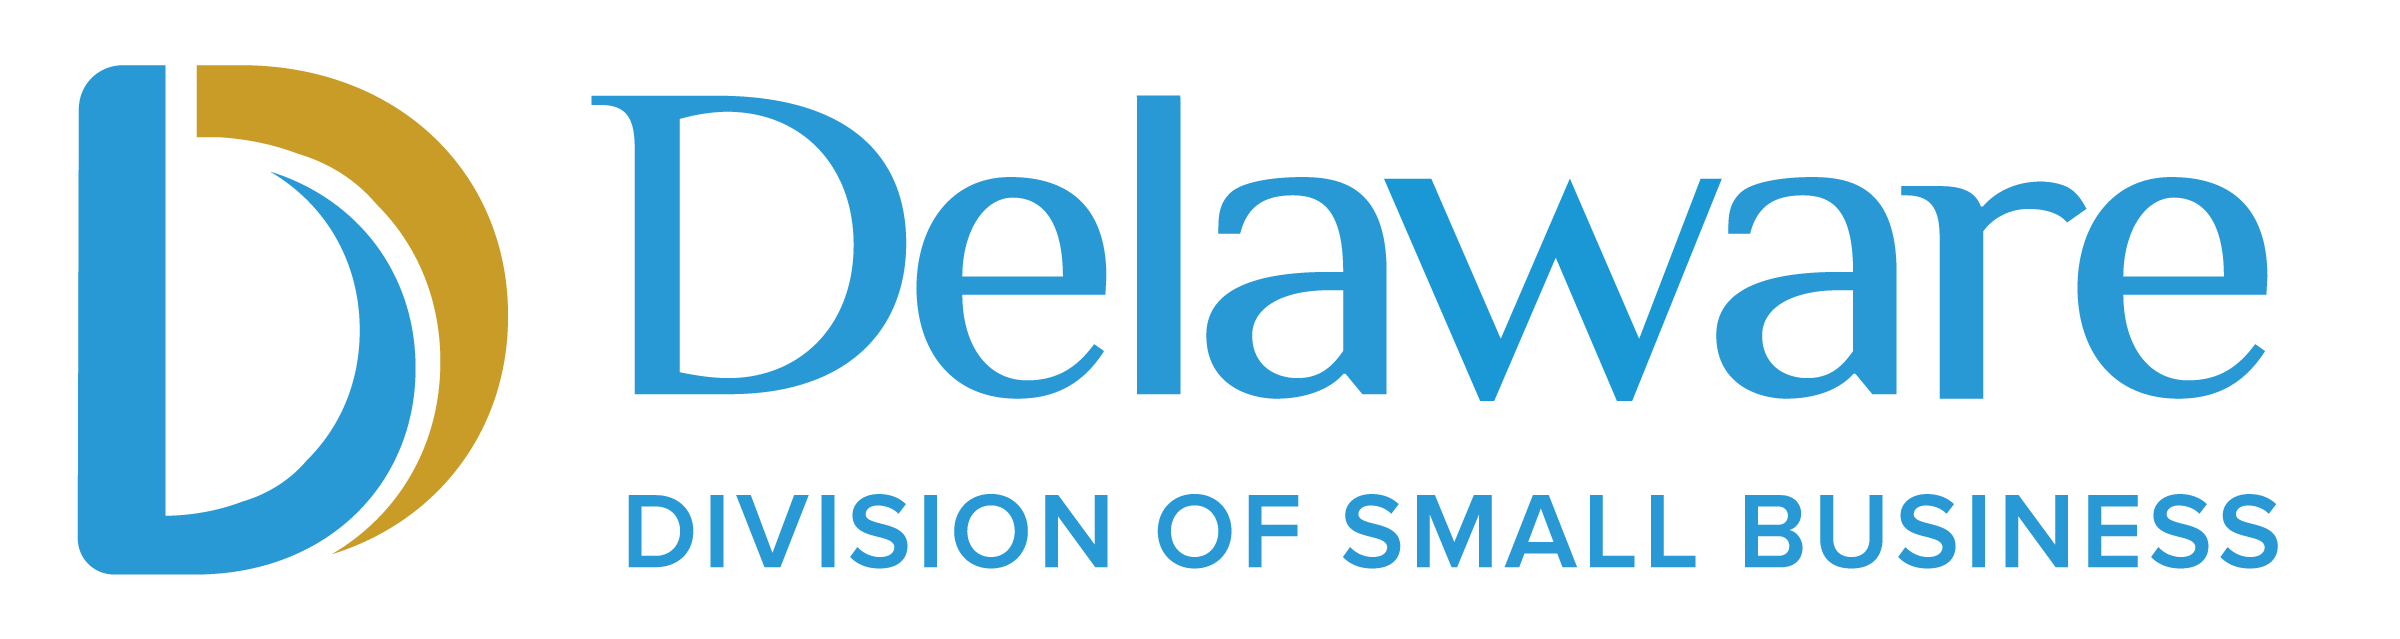 Delaware Division of Small Business